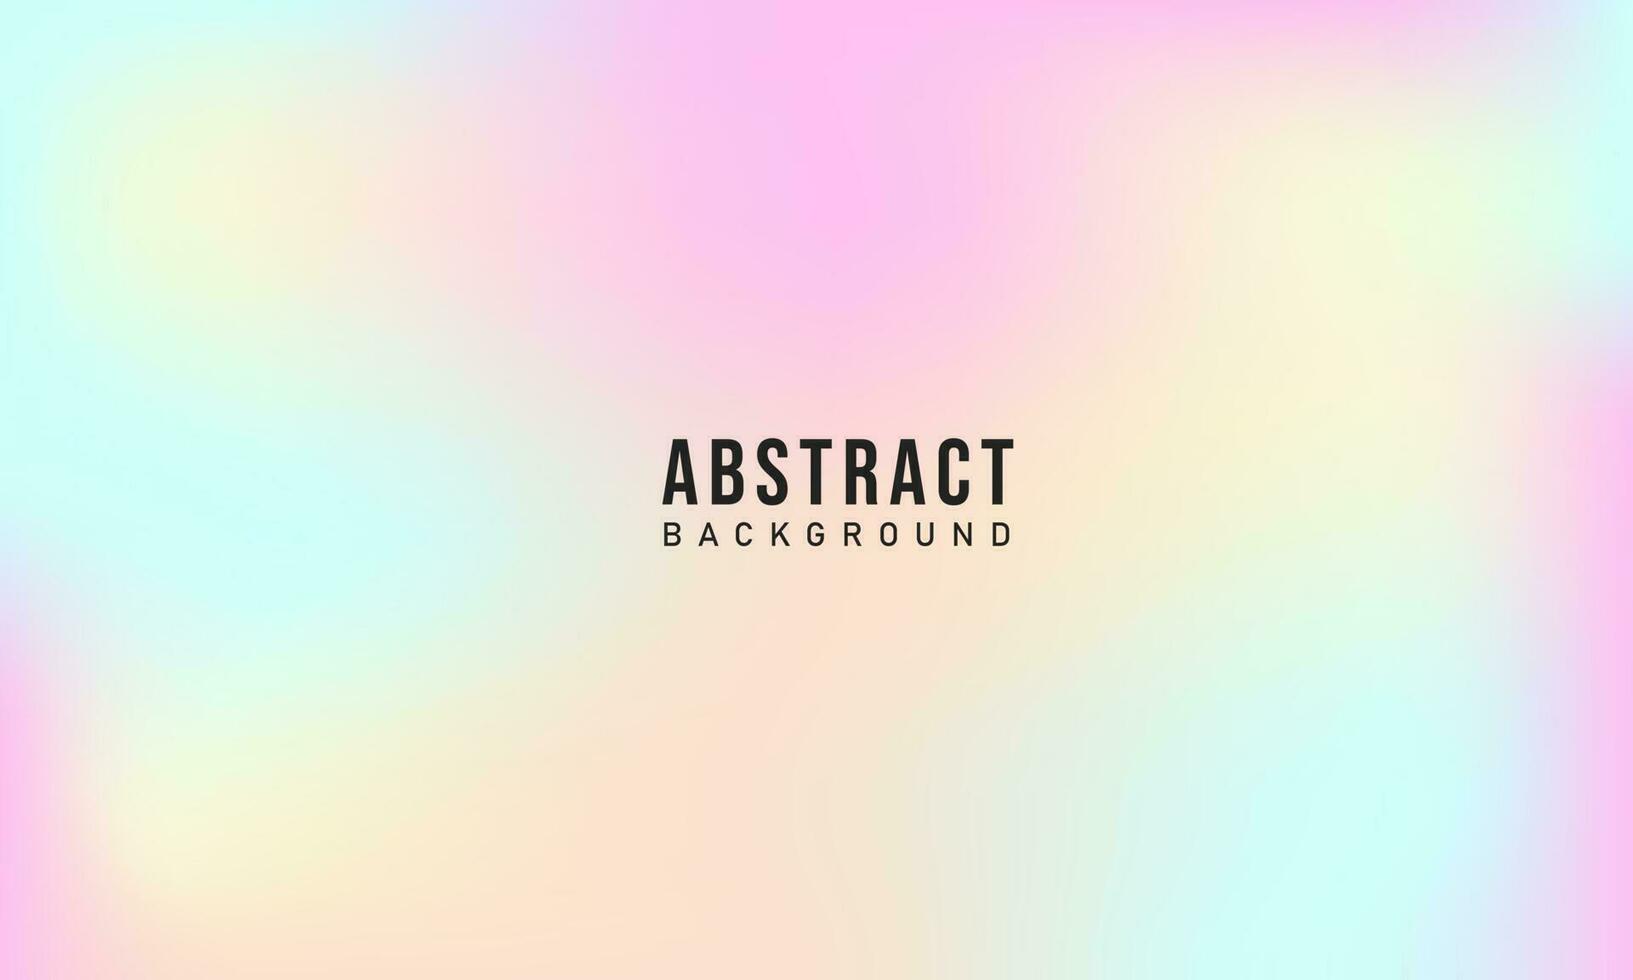 Abstract Colorful Paster Soft Gradient background. Vector illustration for your graphic design, banner, poster, web, and social media